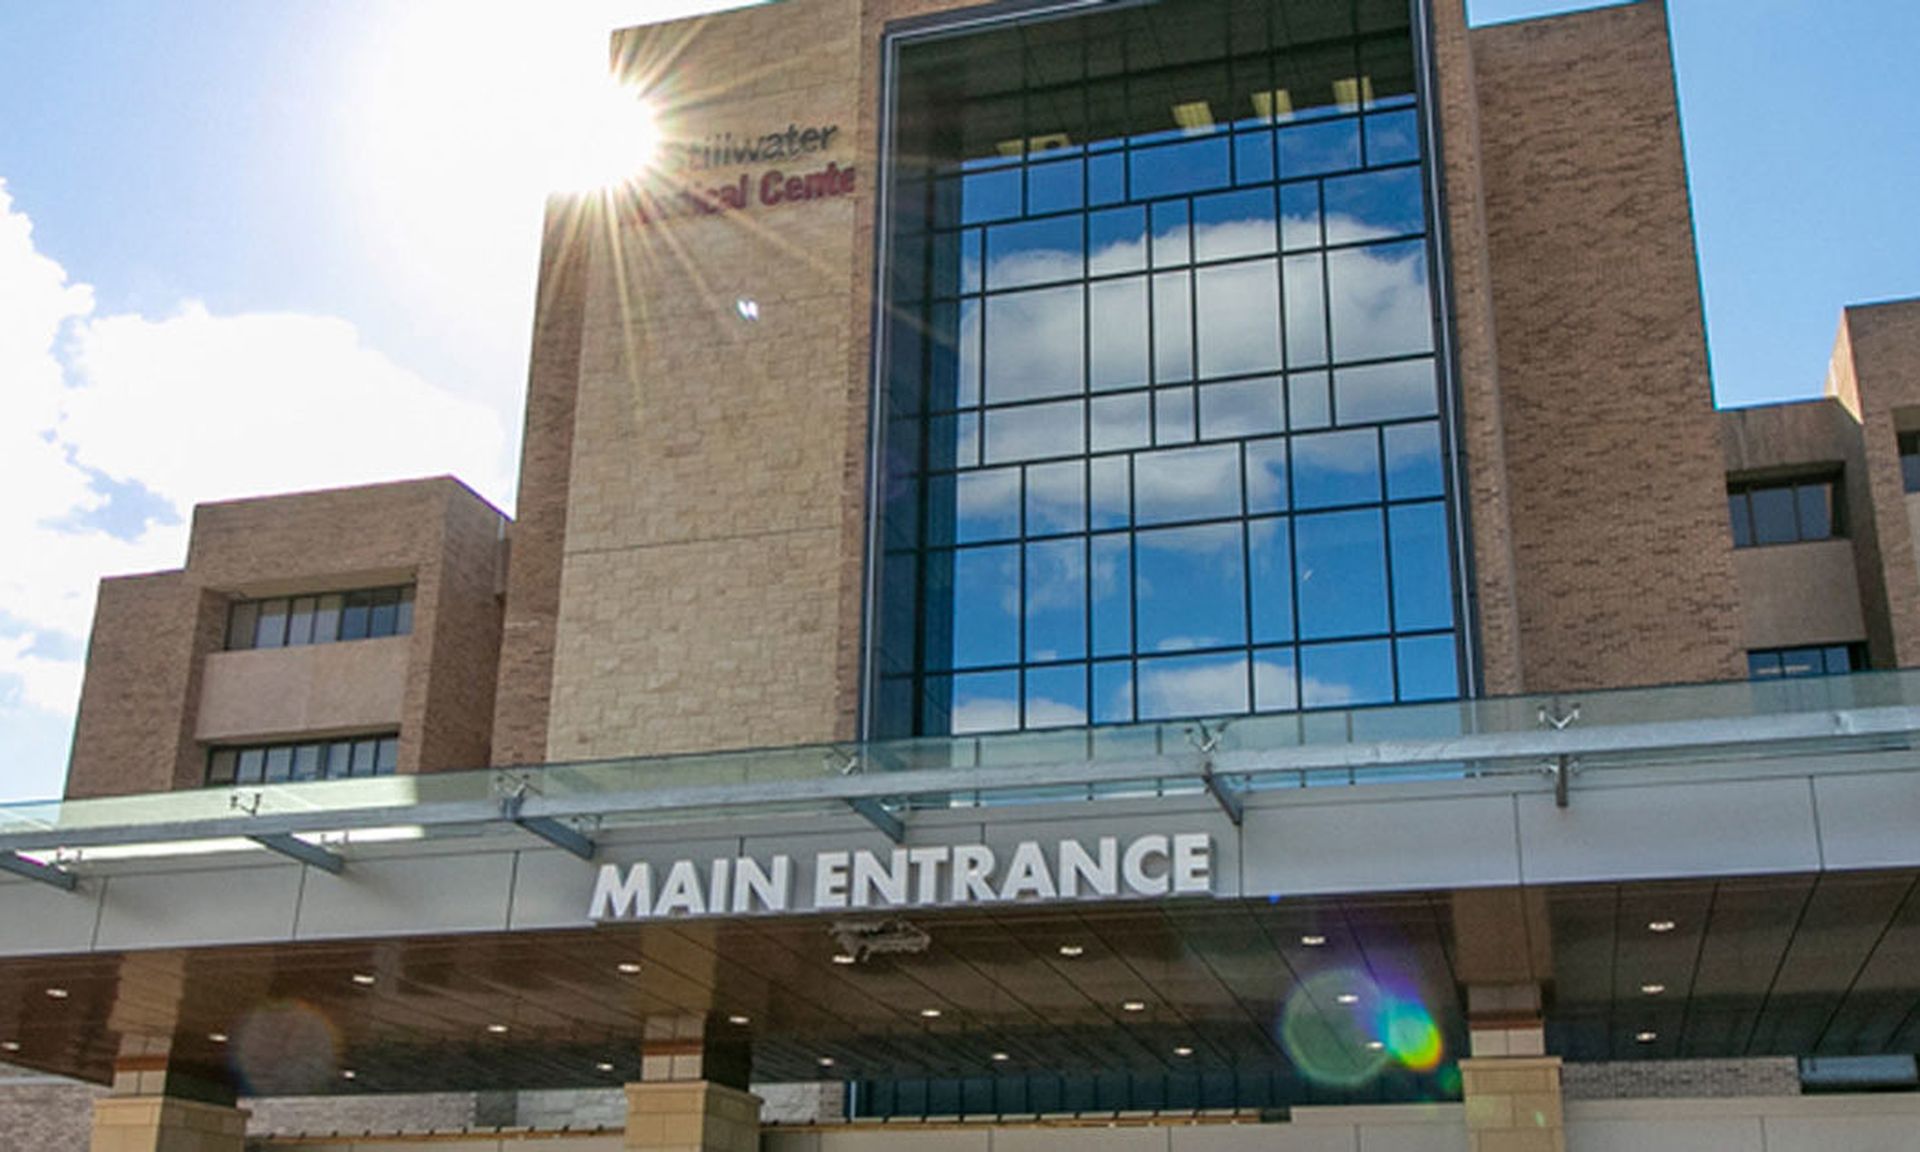 Stillwater Medical Center was hit with a ransomware attack on June 13 and is currently operating under EHR downtime as it attempts to bring its systems back online. (Stillwater Medical Center)